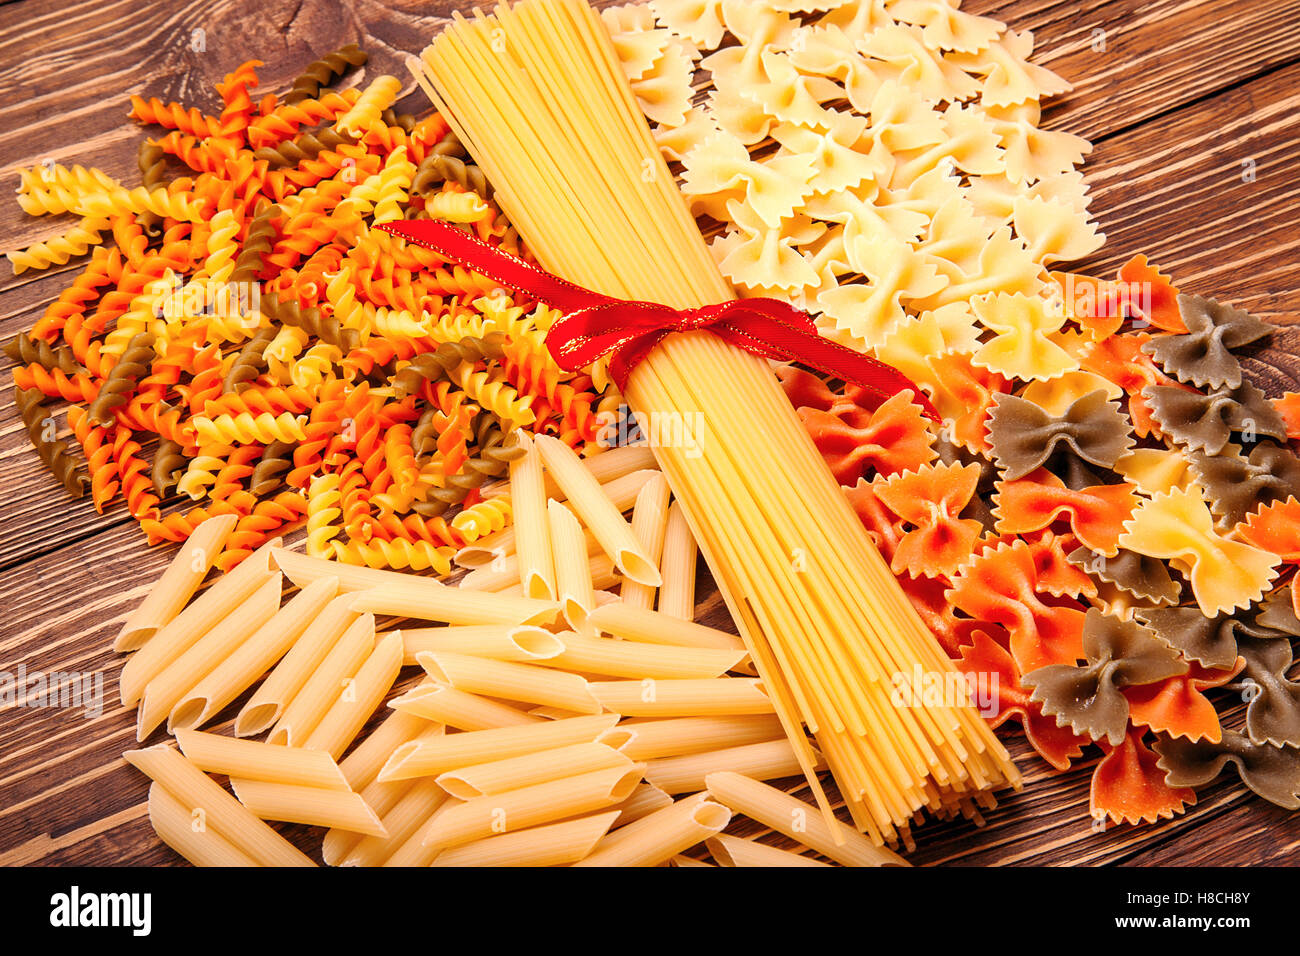 Spaghetti tied with a red ribbon, a number of different types of pasta, lying around on vintage wooden background Stock Photo